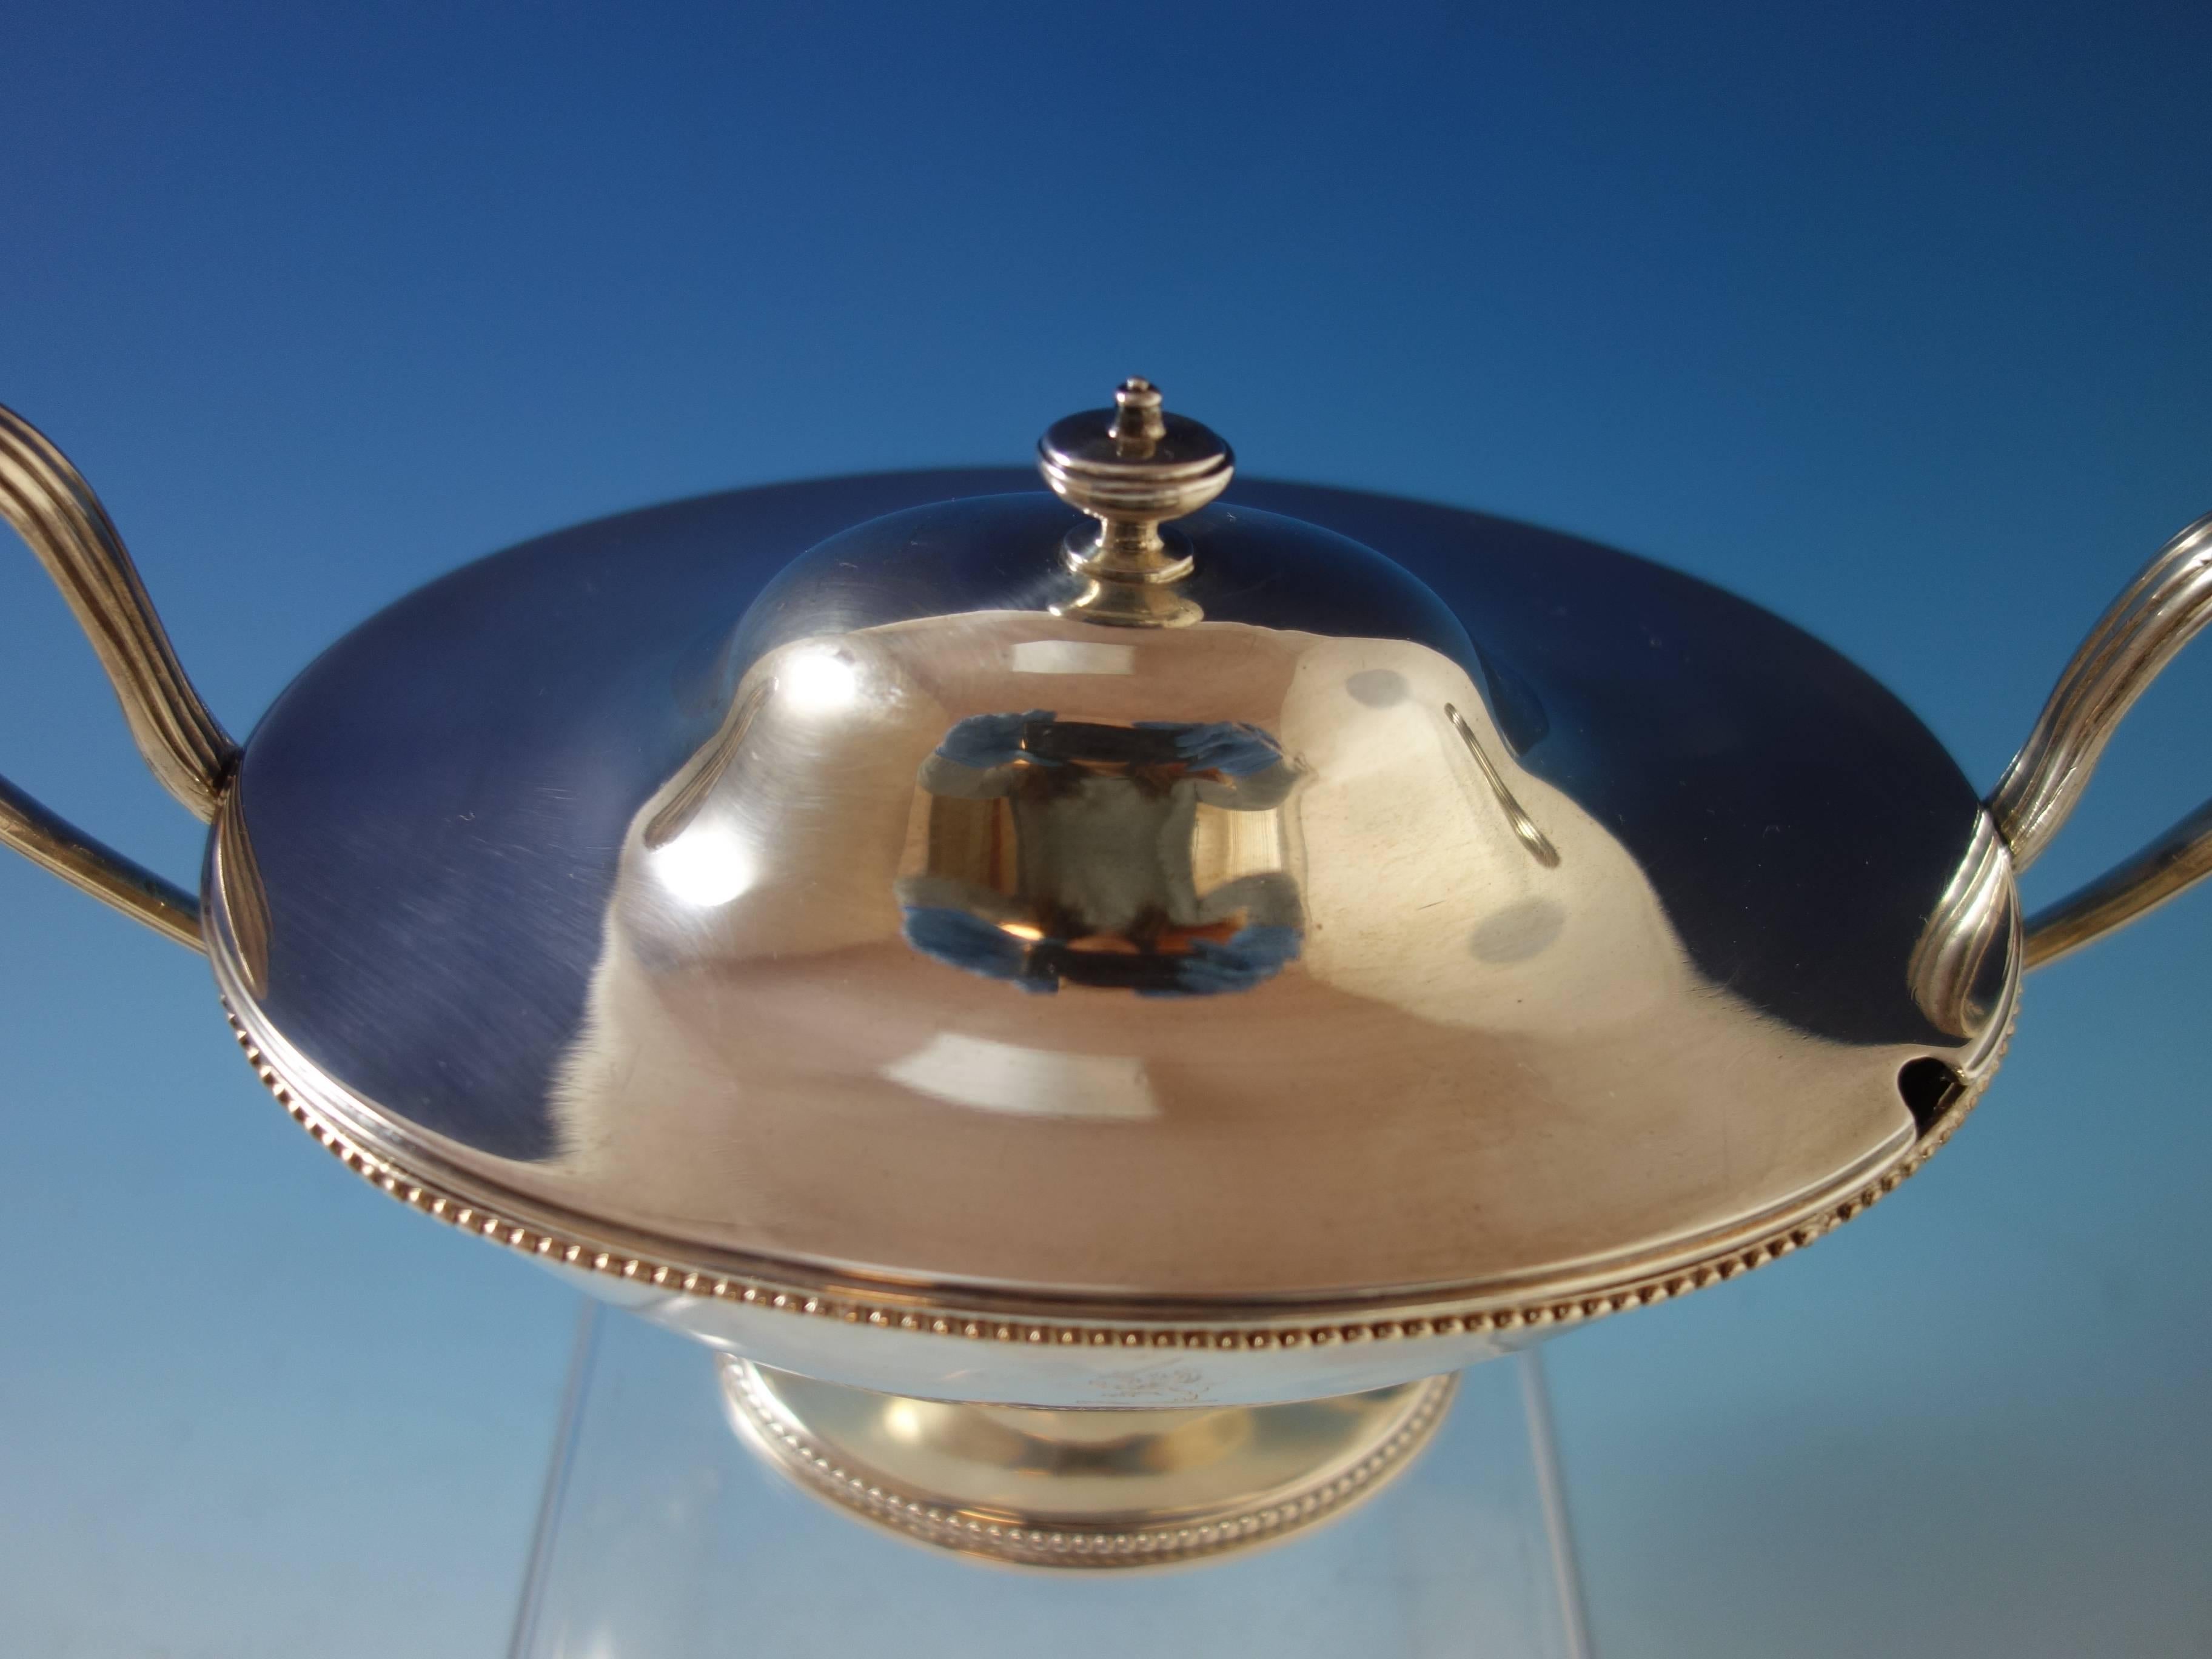 English sterling silver gravy with cover by Robert Hennell I of London, with date letter for 1780. This piece measures 5 1/2